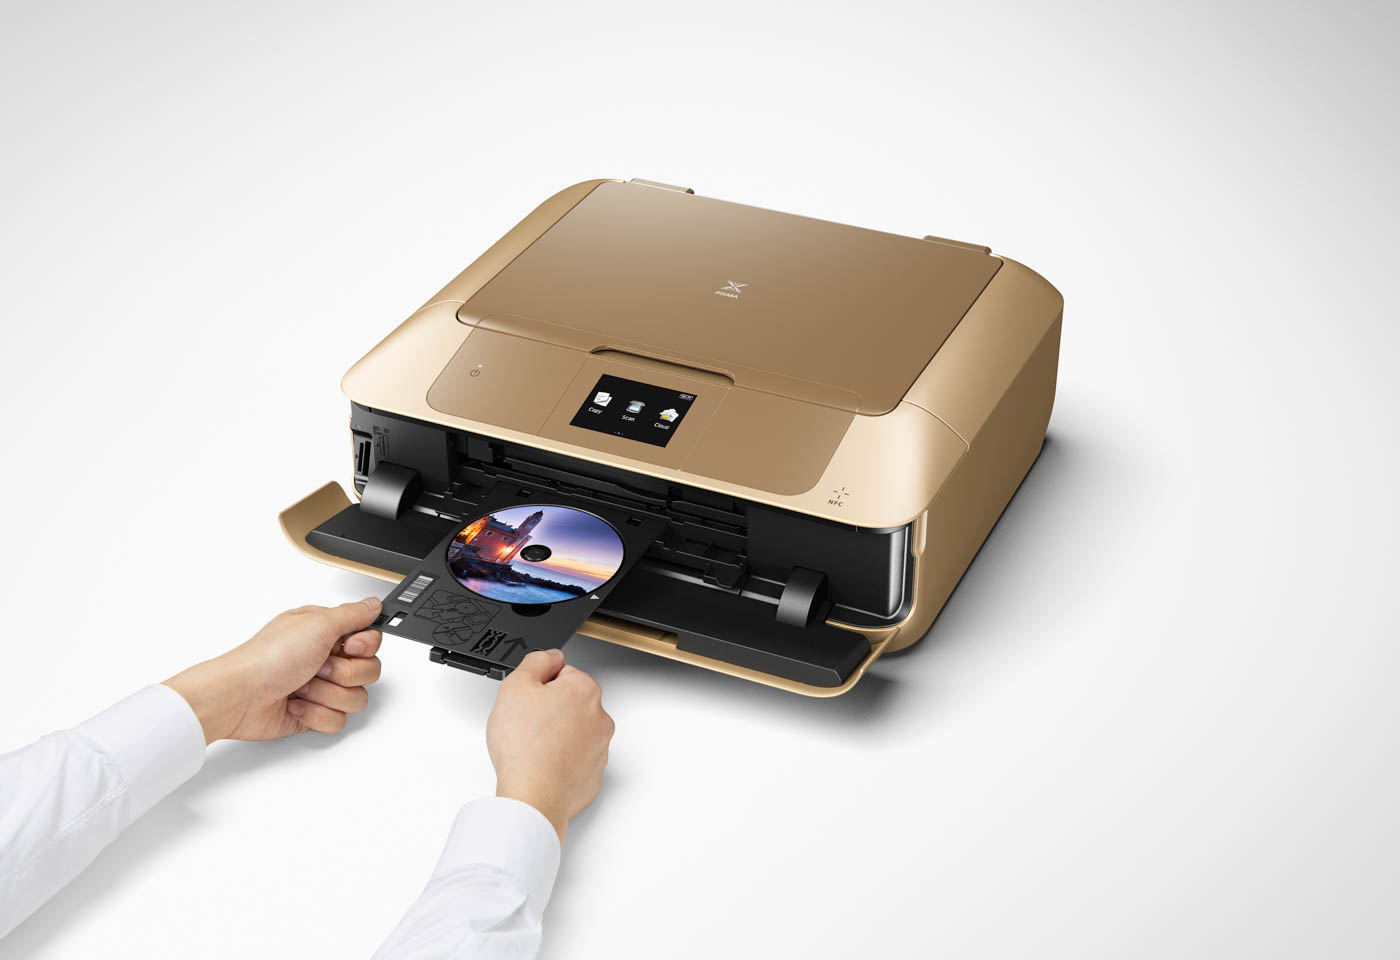 Canon PIXMA Gold MG7766 printer with CD